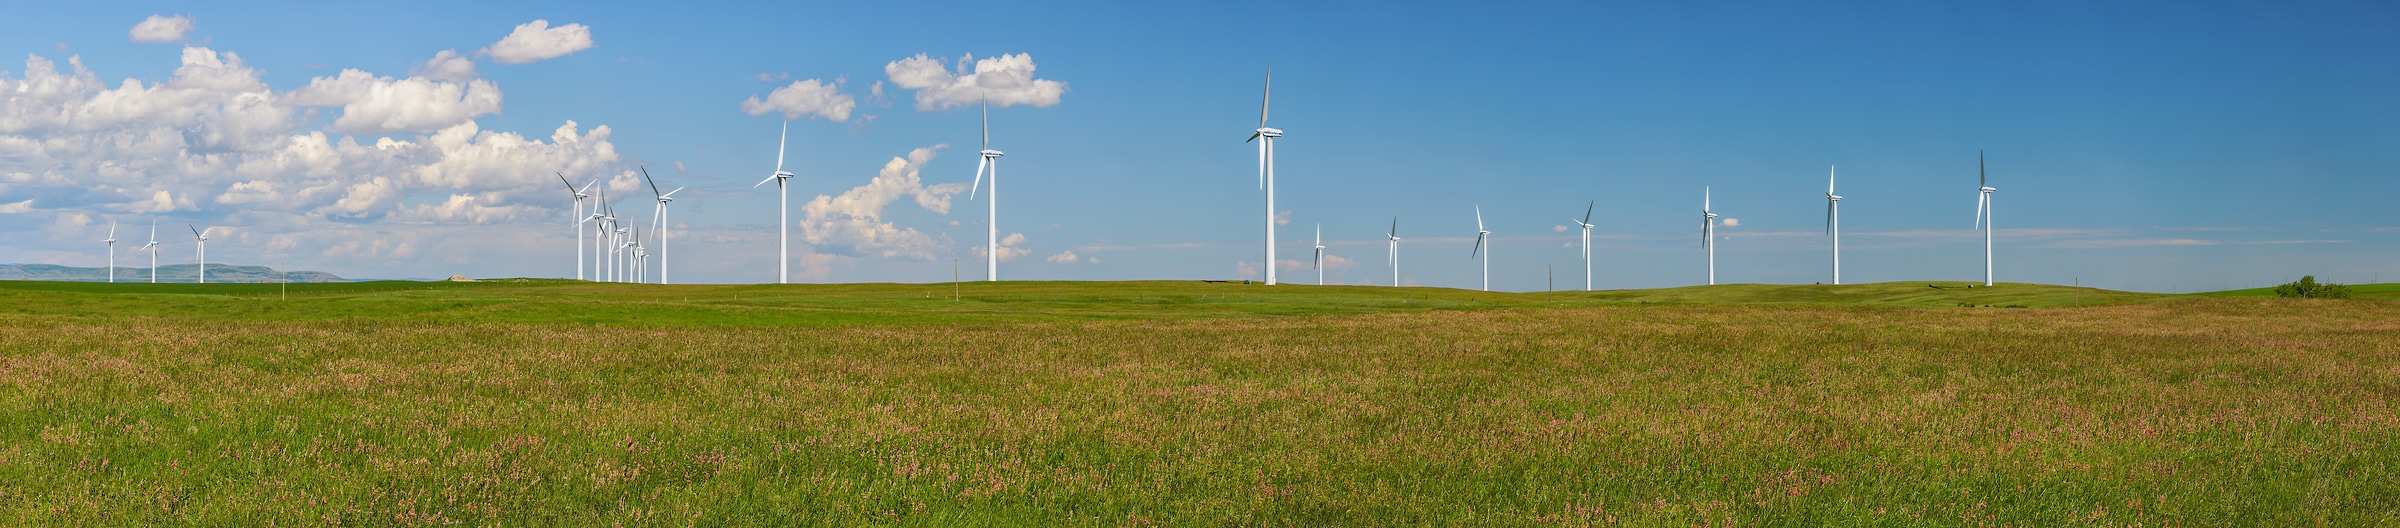 2,202 megapixels! A very high resolution, large-format VAST photo print of wind turbines in a grassy field; landscape photograph created by Scott Dimond in Fort Macleod, Alberta, Canada